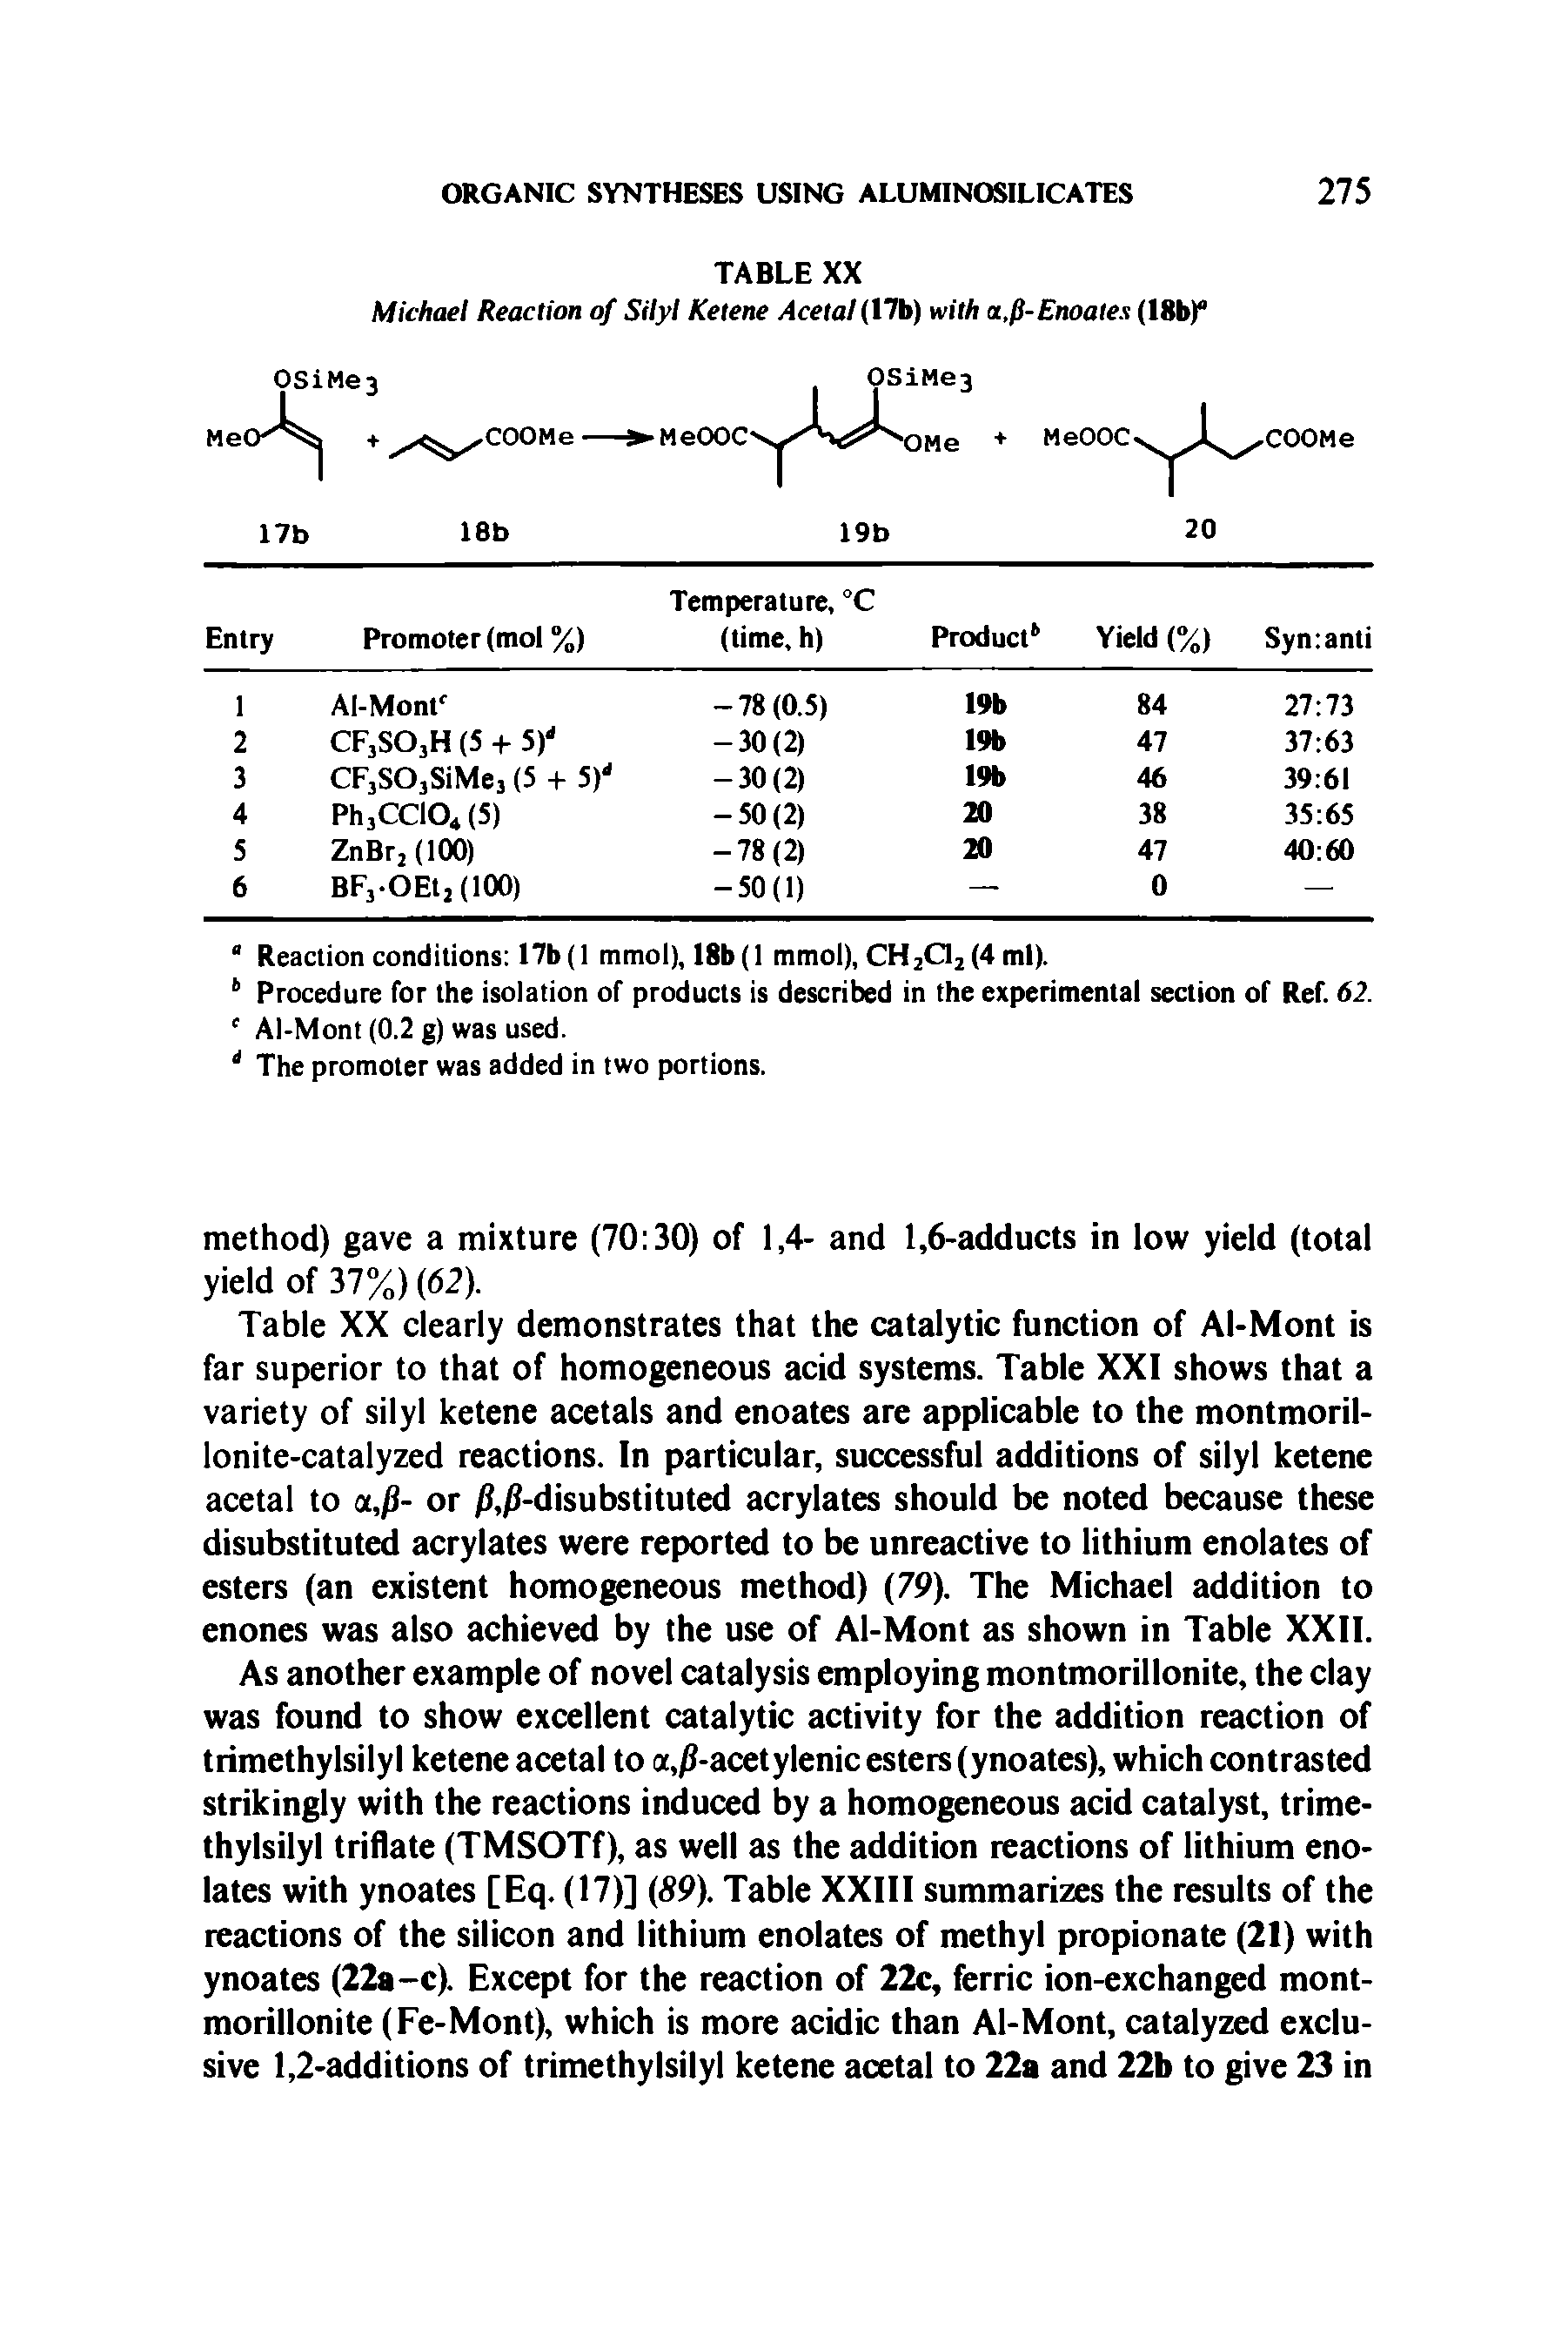 Table XX clearly demonstrates that the catalytic function of Al-Mont is far superior to that of homogeneous acid systems. Table XXI shows that a variety of silyl ketene acetals and enoates are applicable to the montmoril-lonite-catalyzed reactions. In particular, successful additions of silyl ketene acetal to ot,p- or, -disubstituted acrylates should be noted because these disubstituted acrylates were reported to be unreactive to lithium enolates of esters (an existent homogeneous method) (79). The Michael addition to enones was also achieved by the use of Al-Mont as shown in Table XXII.